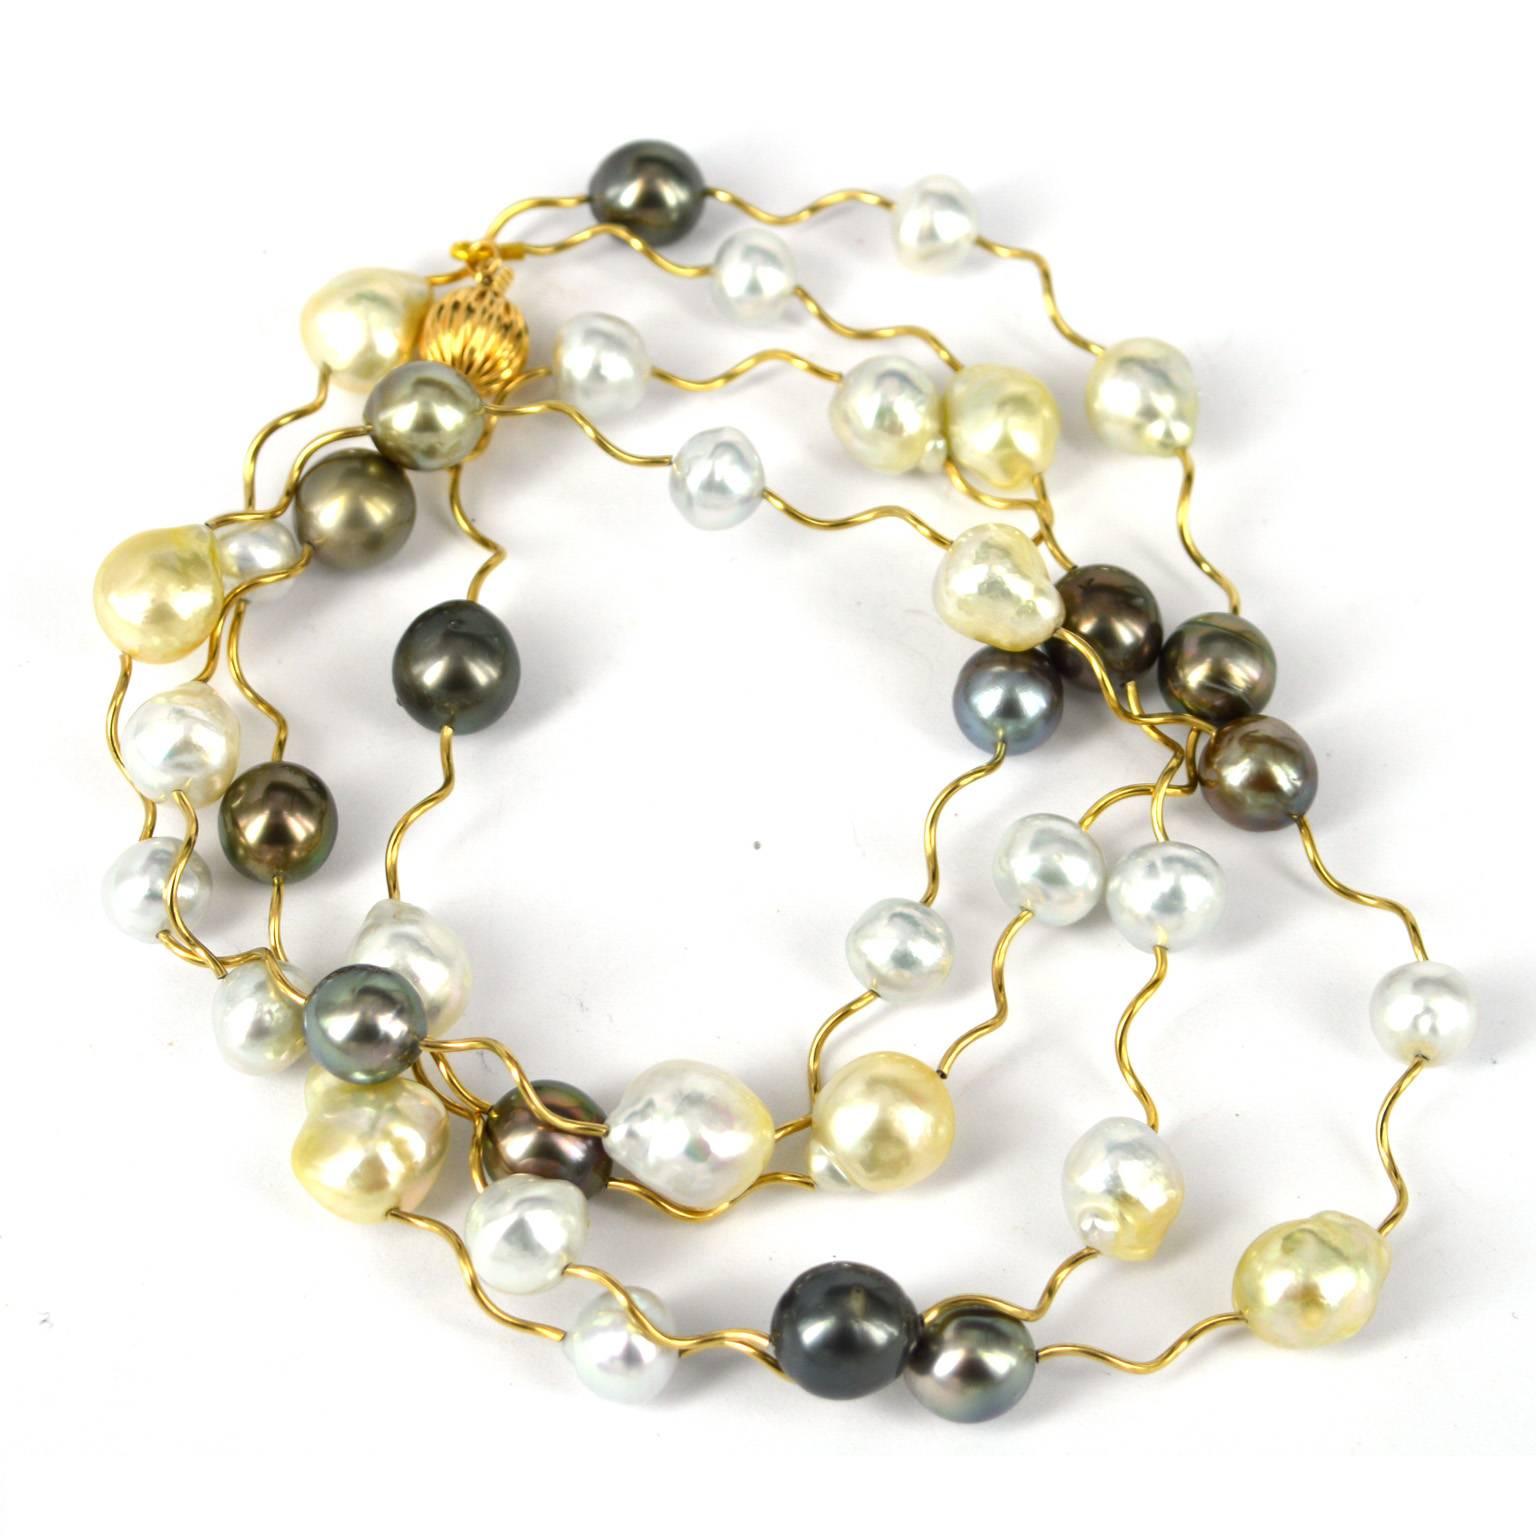 Long Tahitian and South Sea Pearl necklace with 14k gold filled twist tubes.
This 112cm necklace has a 10mm 14k gold filled clasp and can be worn long or as a double strand.